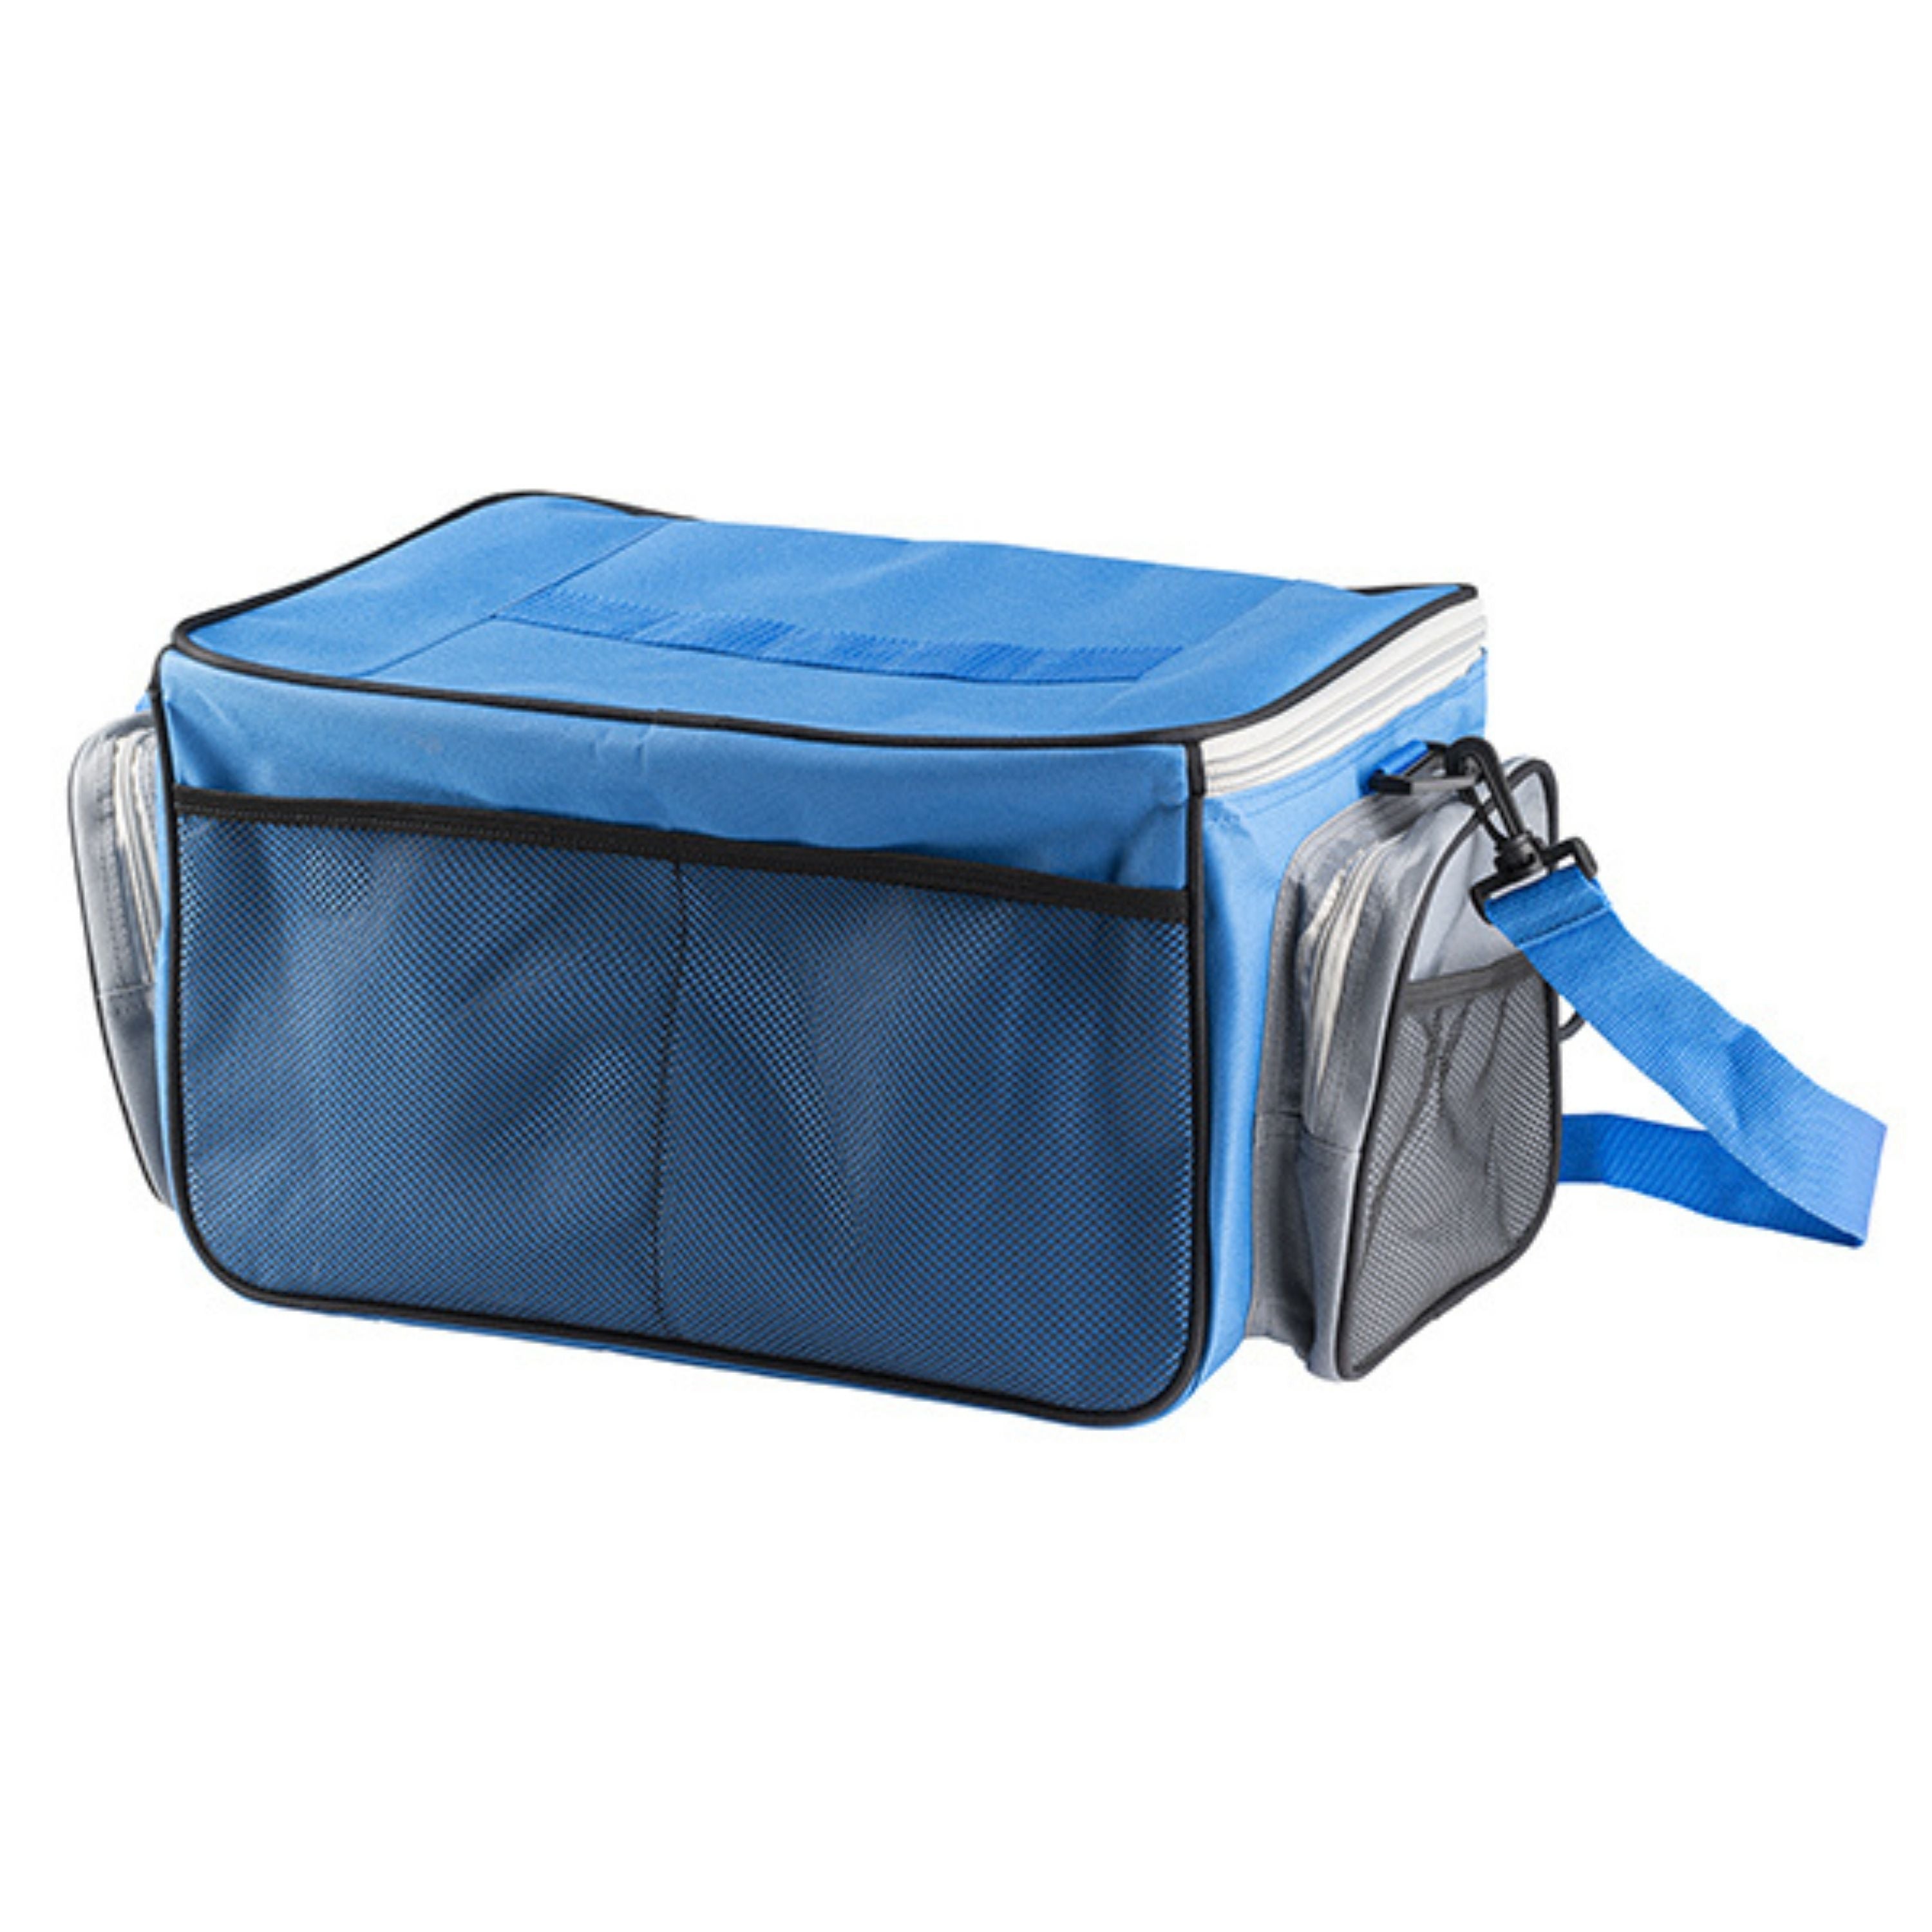 Small format fishing bag with tackle boxes